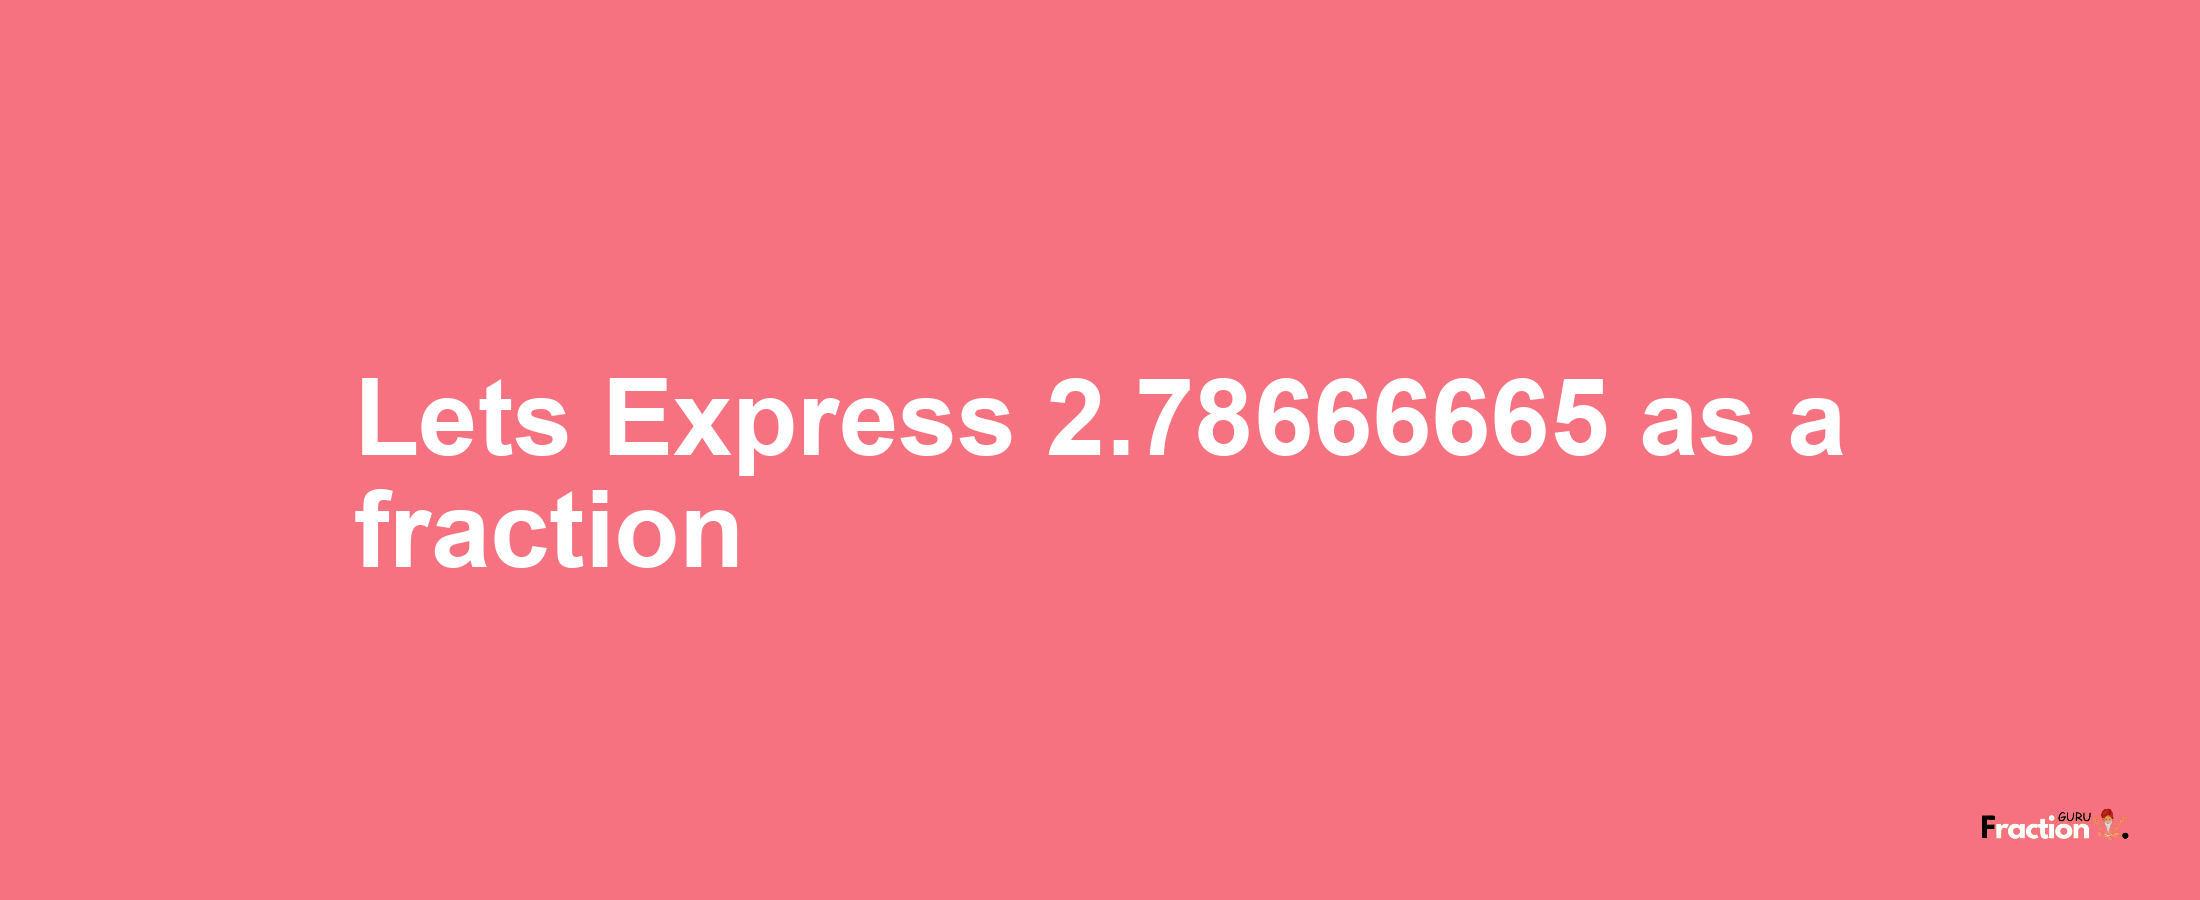 Lets Express 2.78666665 as afraction